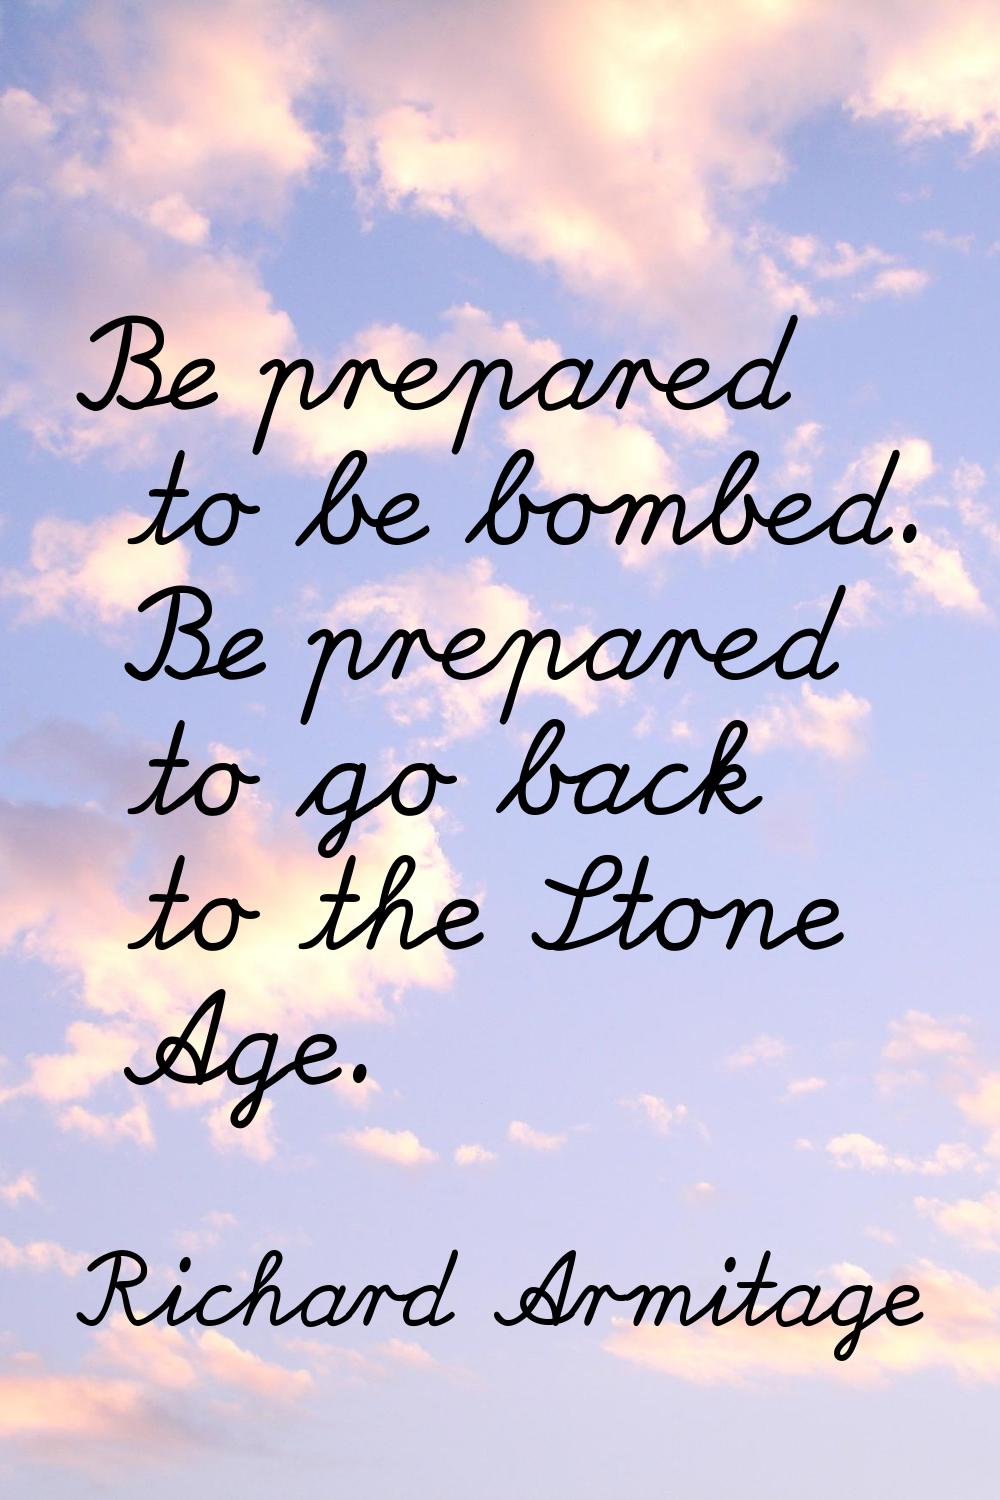 Be prepared to be bombed. Be prepared to go back to the Stone Age.